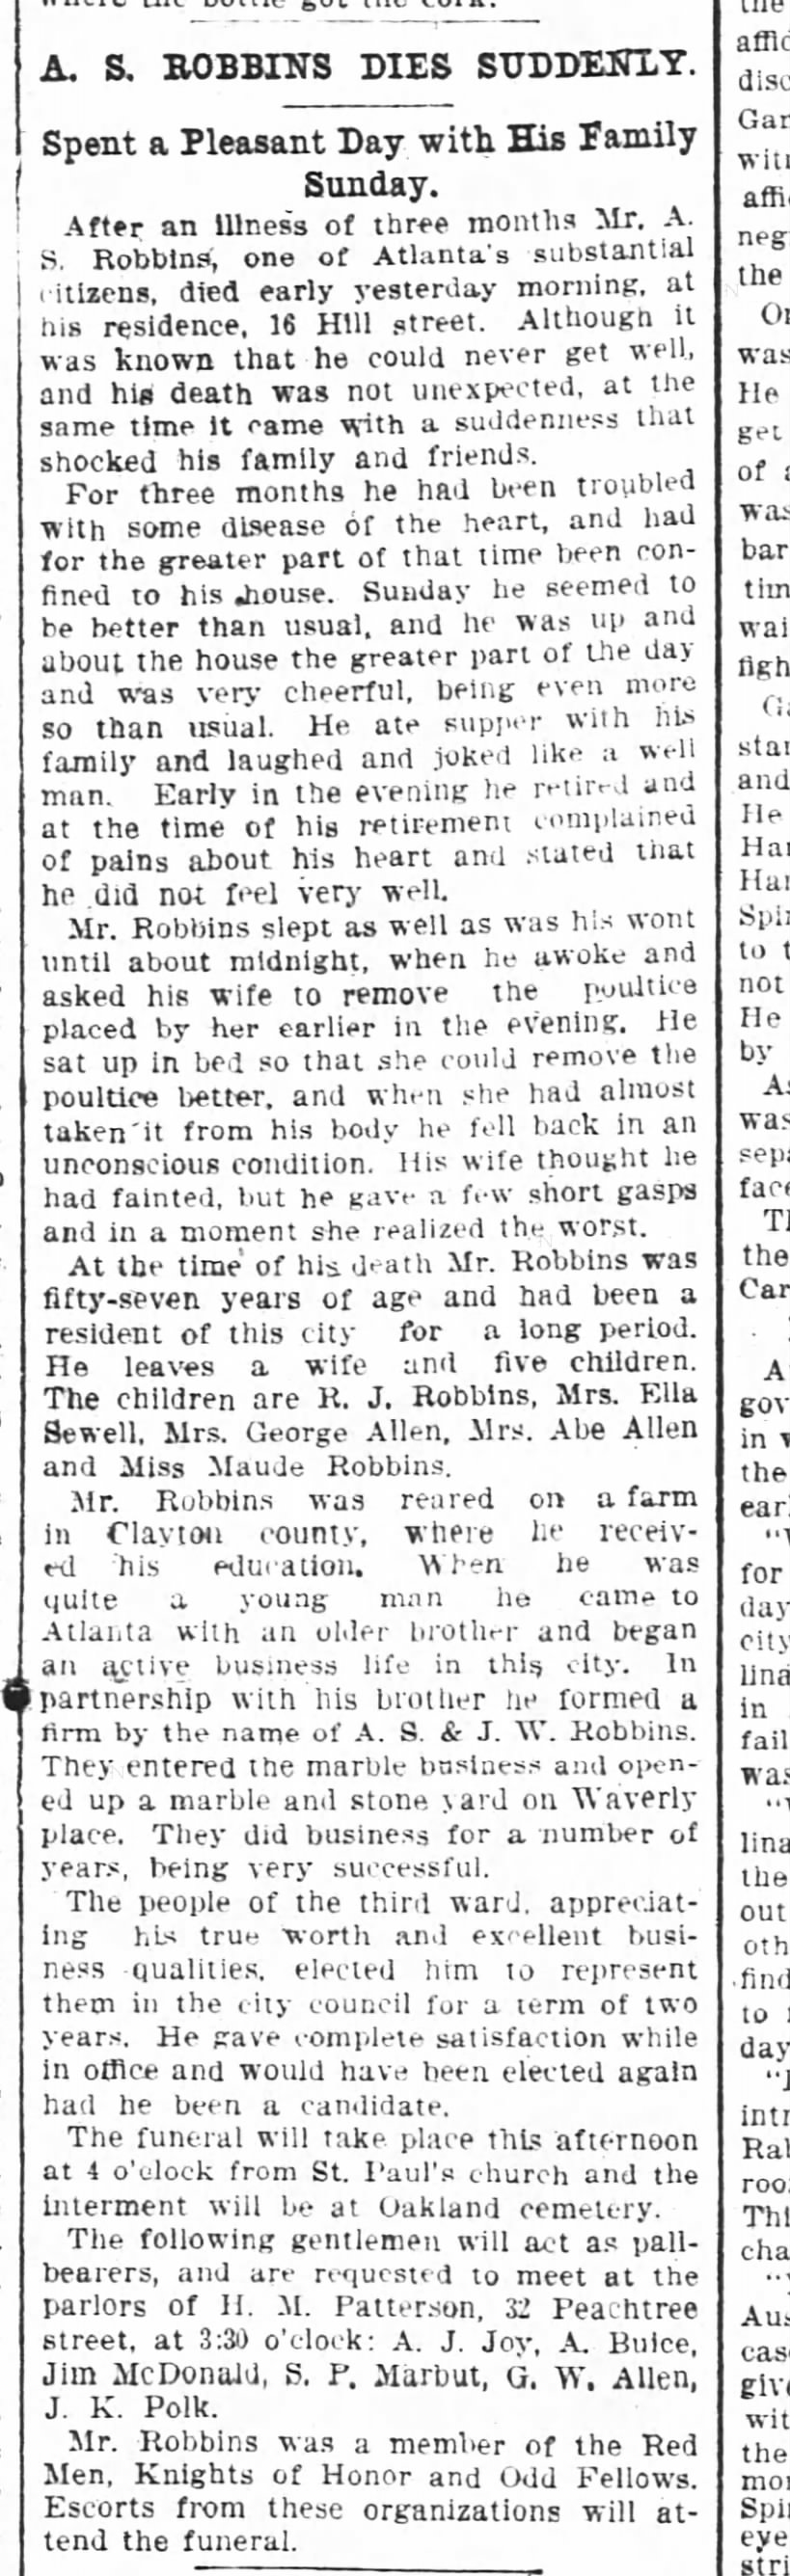 A. S. Robbins Dies 1896 (Also mentions brother J. W. Robbins)